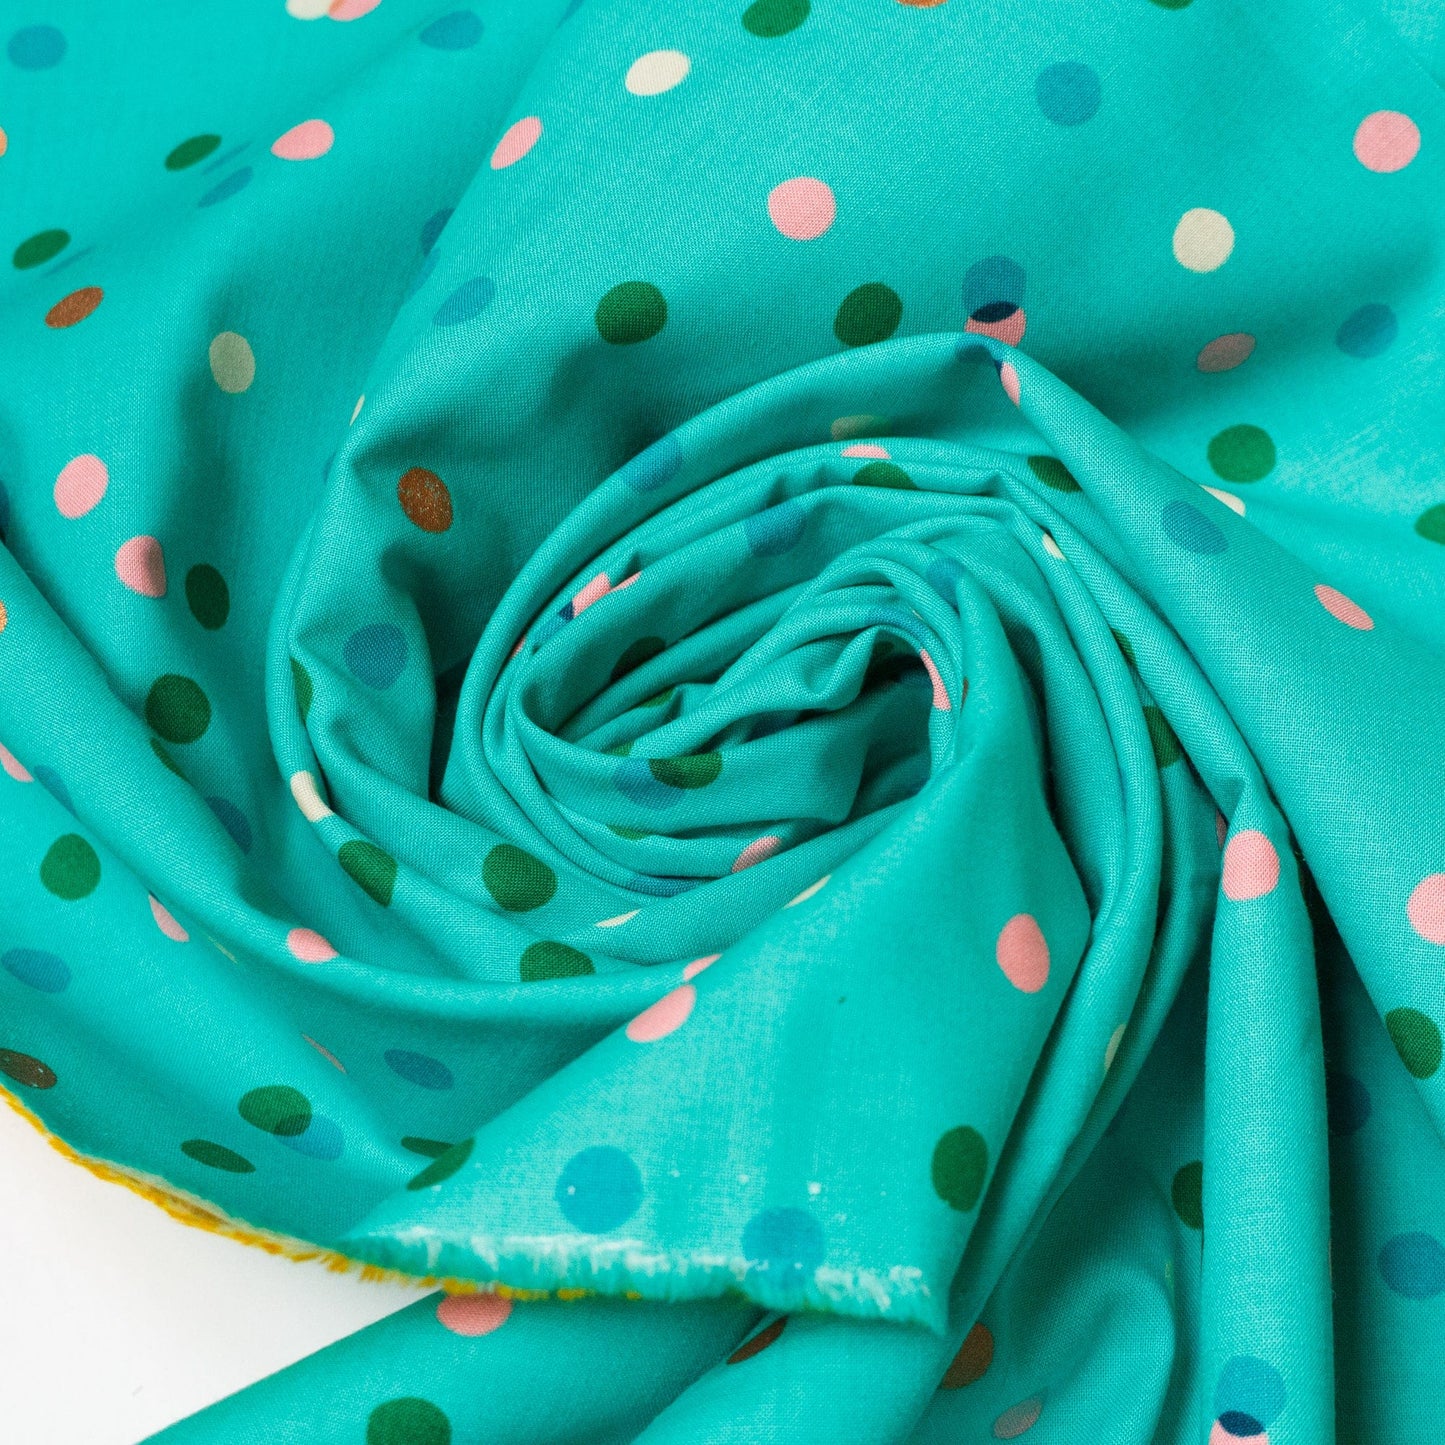 Ruby Star Society 'Camellia' Quilting Cotton 'Spritz' in Tropic